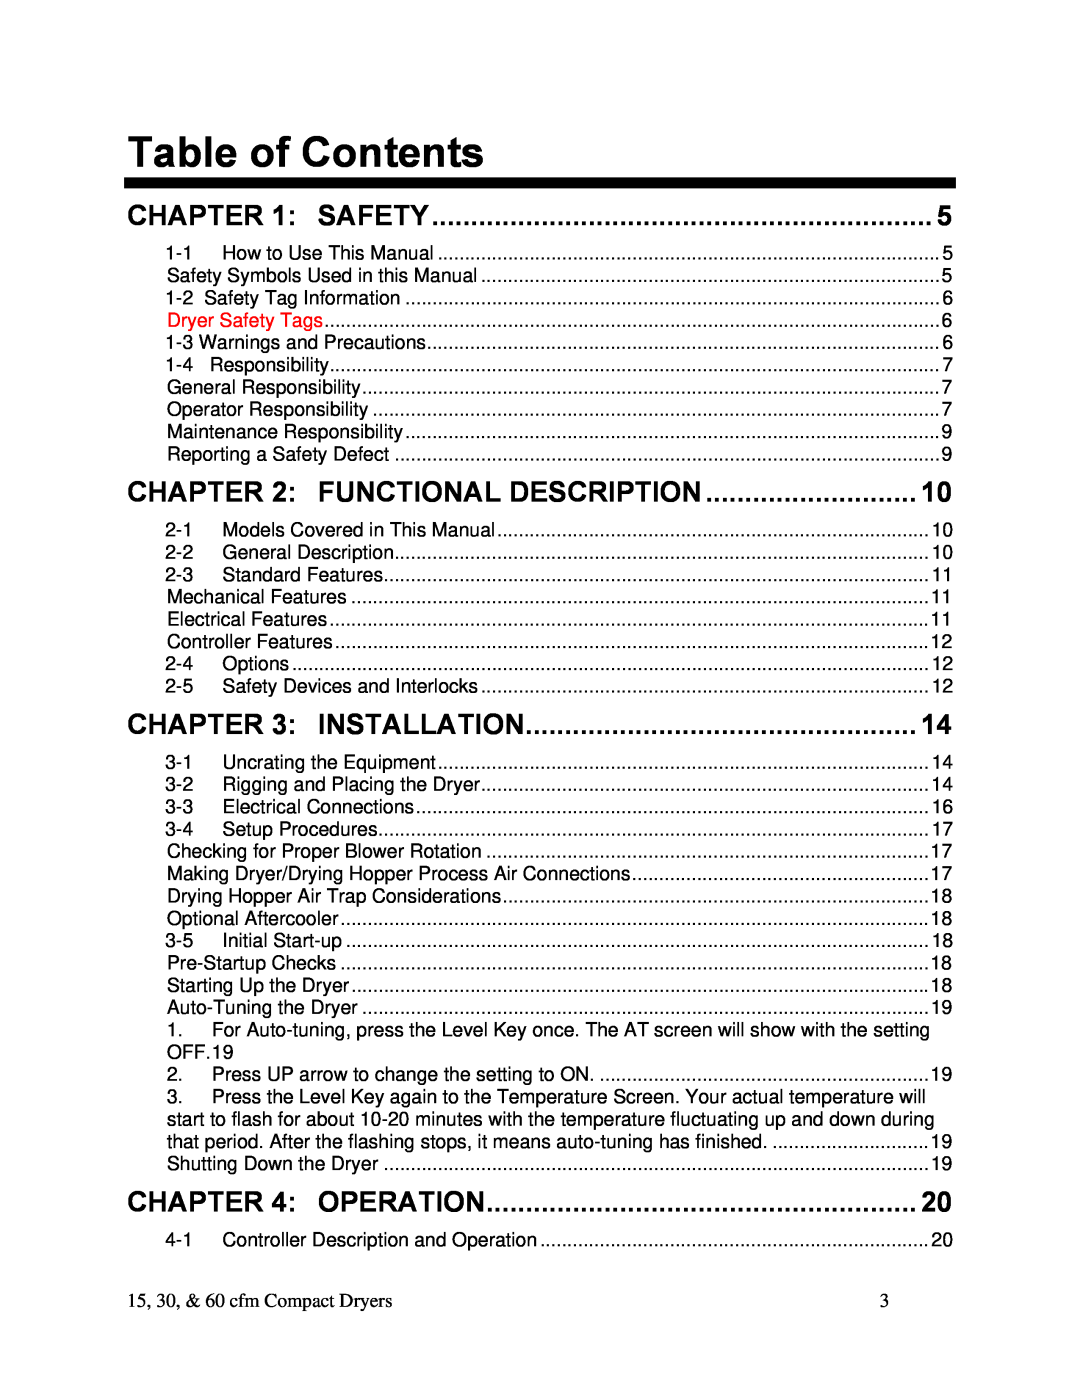 Sterling 882.00291.00 specifications Table of Contents, Safety, Functional Description, Installation, Operation 